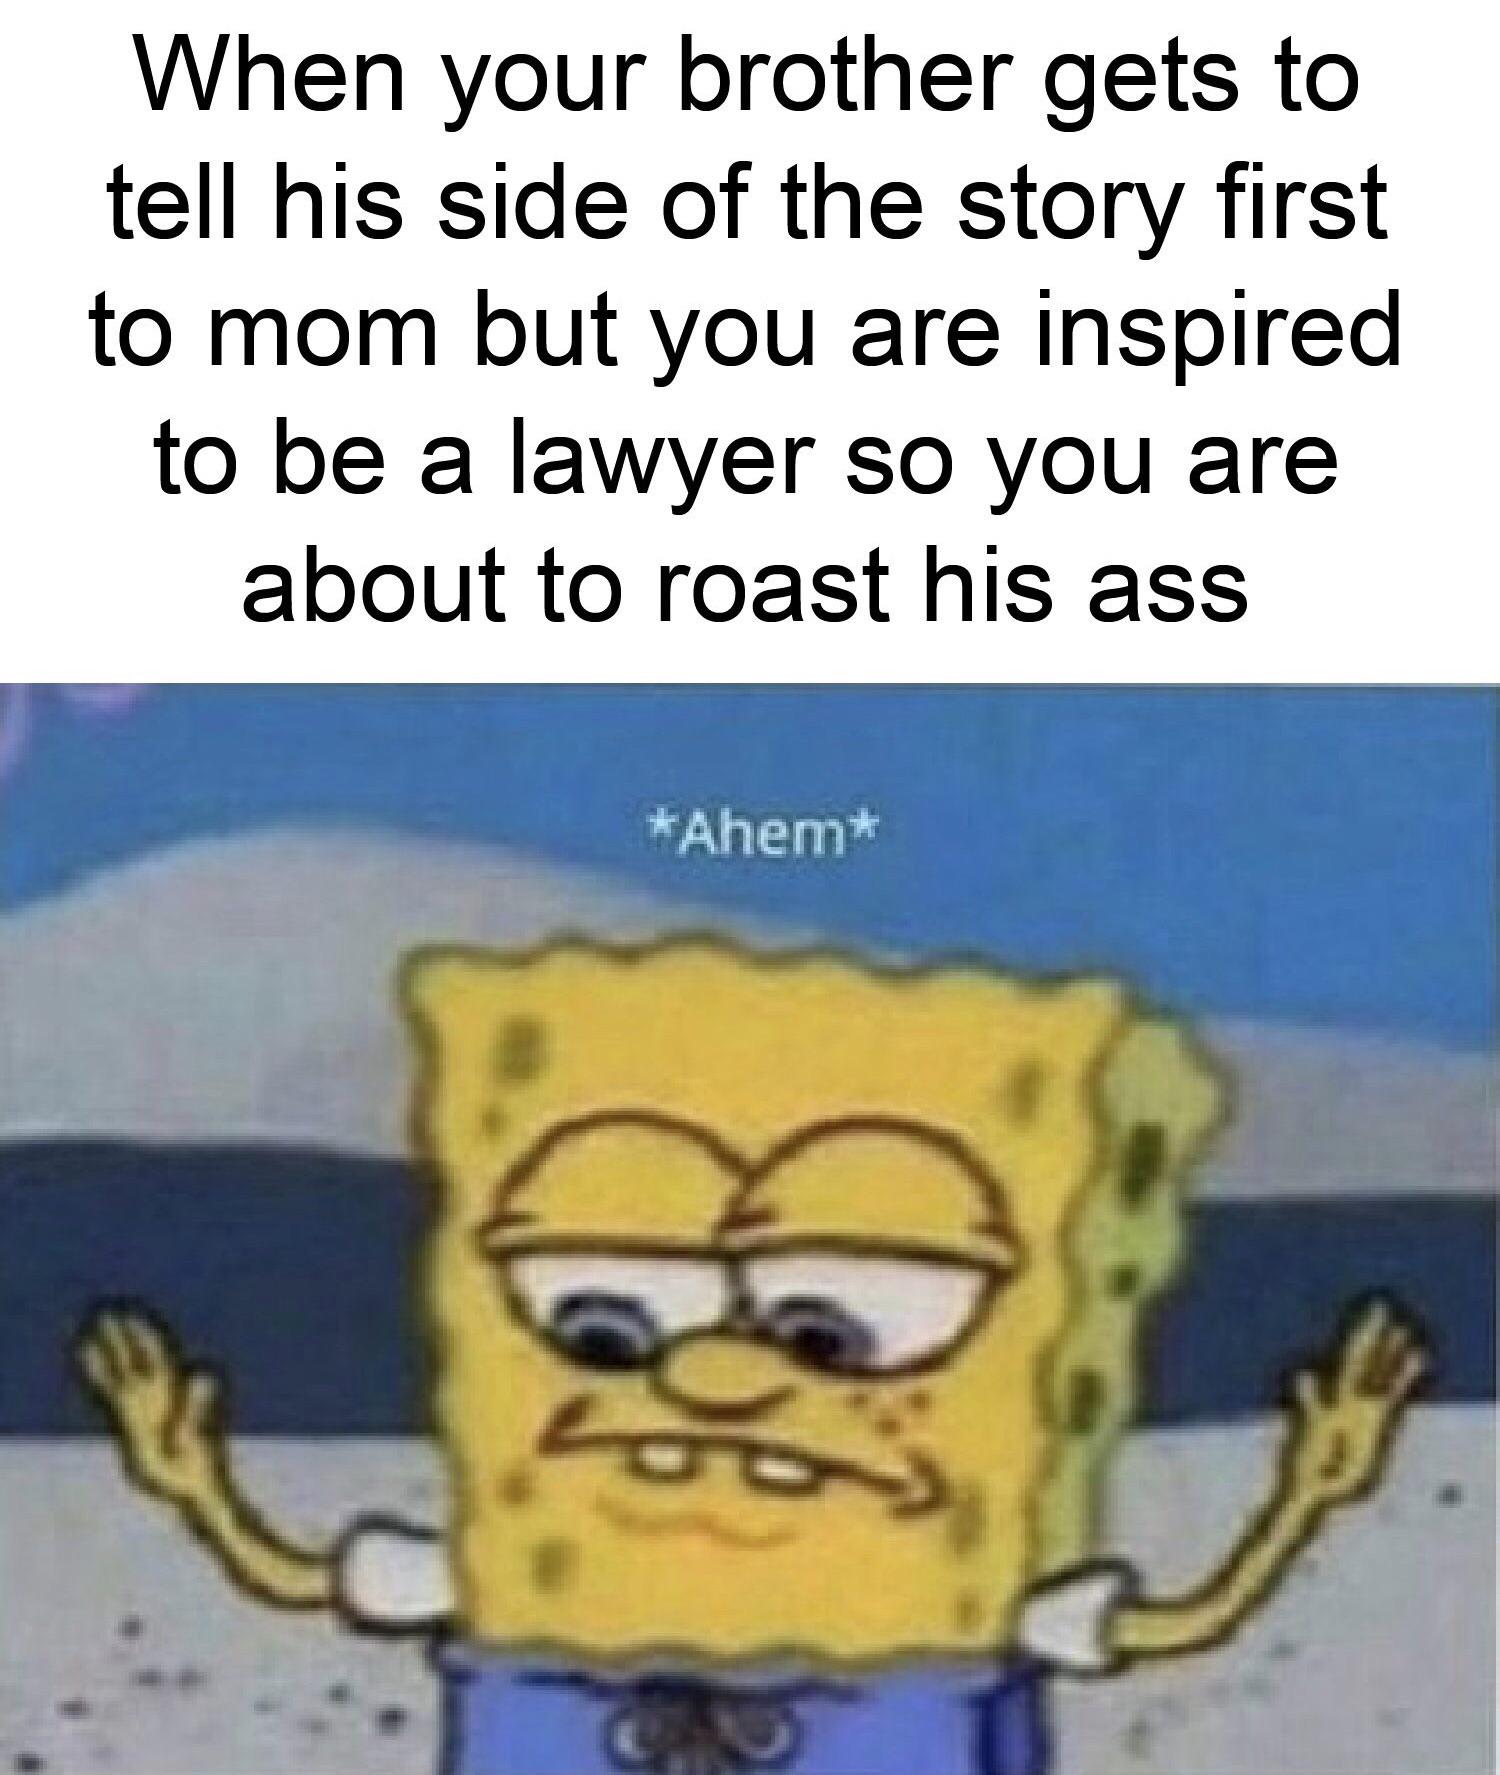 spongebob spongebob-memes spongebob text: When your brother gets to tell his side of the story first to mom but you are inspired to be a lawyer so you are about to roast his ass *Ahem* 